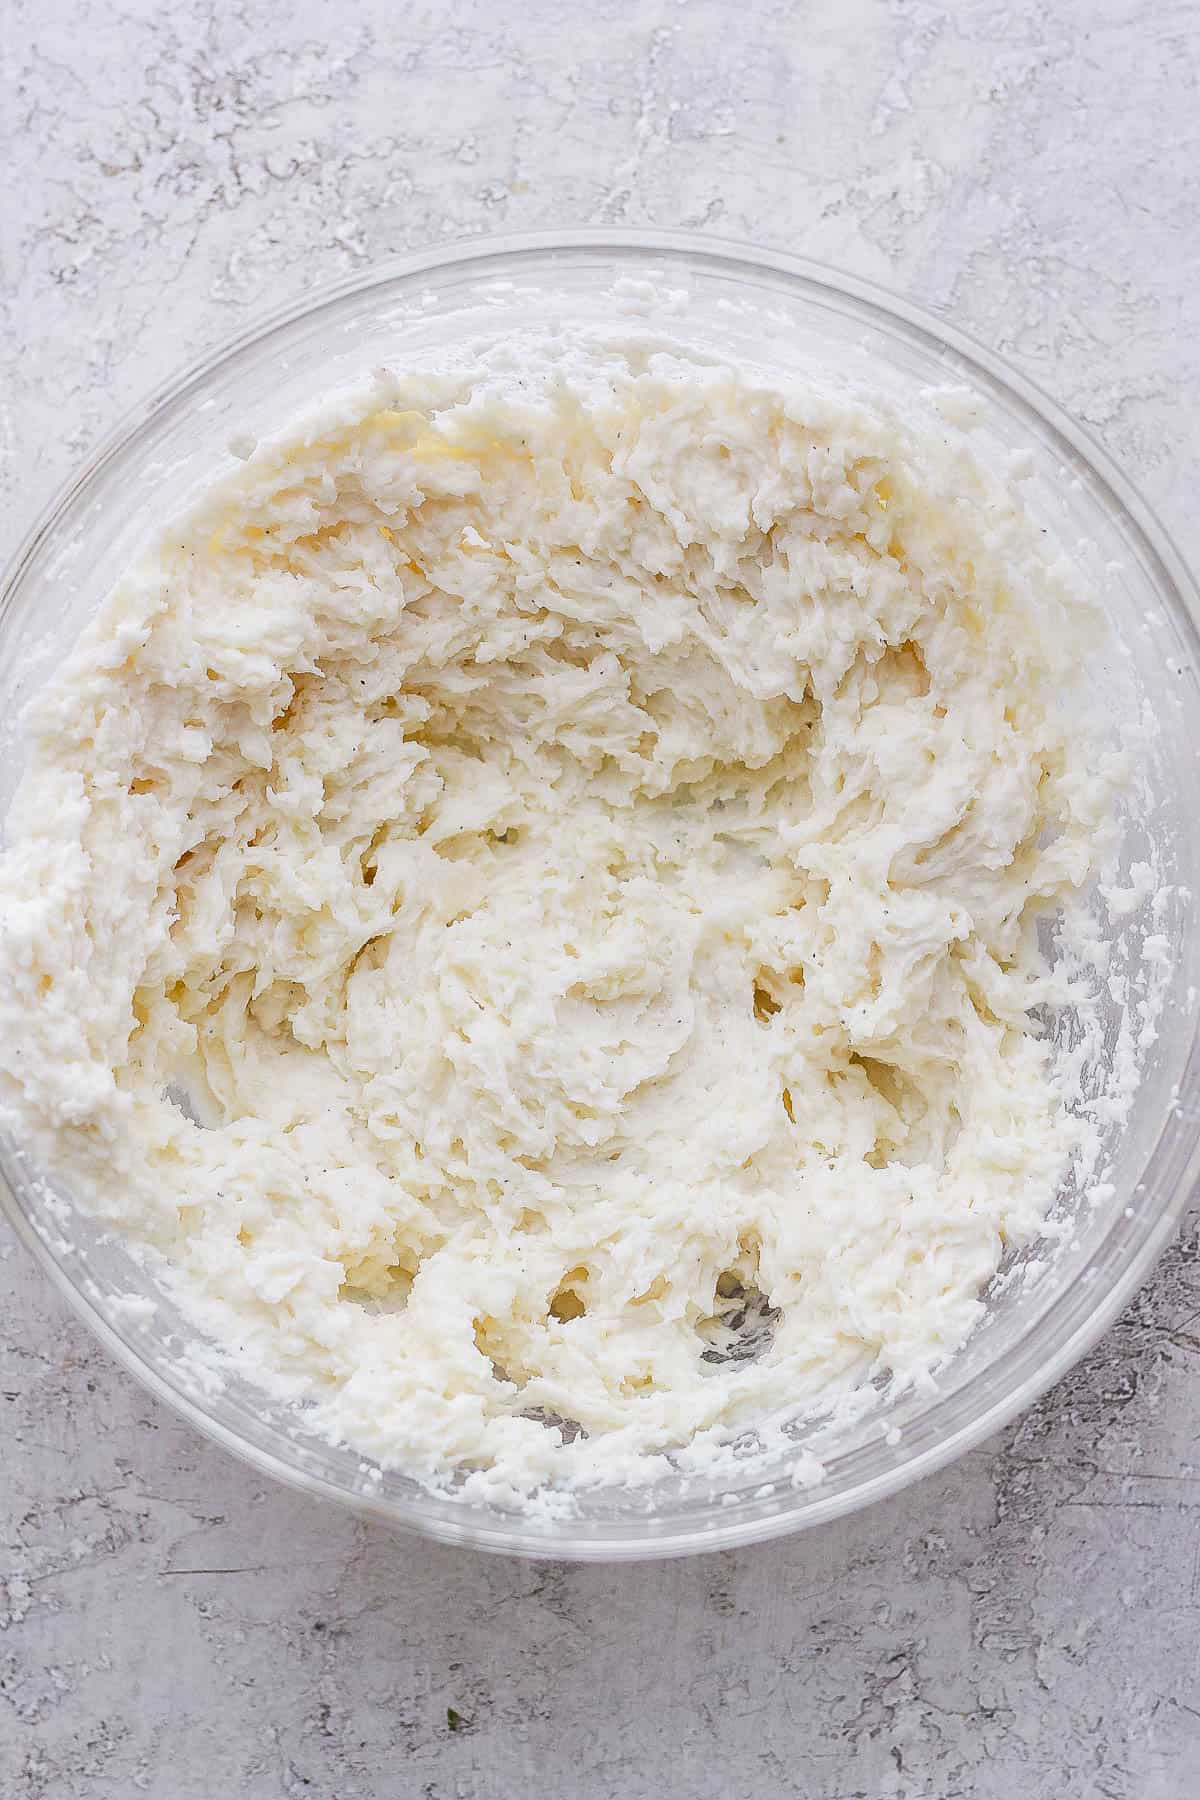 The potato filling whipped together in a large mixing bowl.